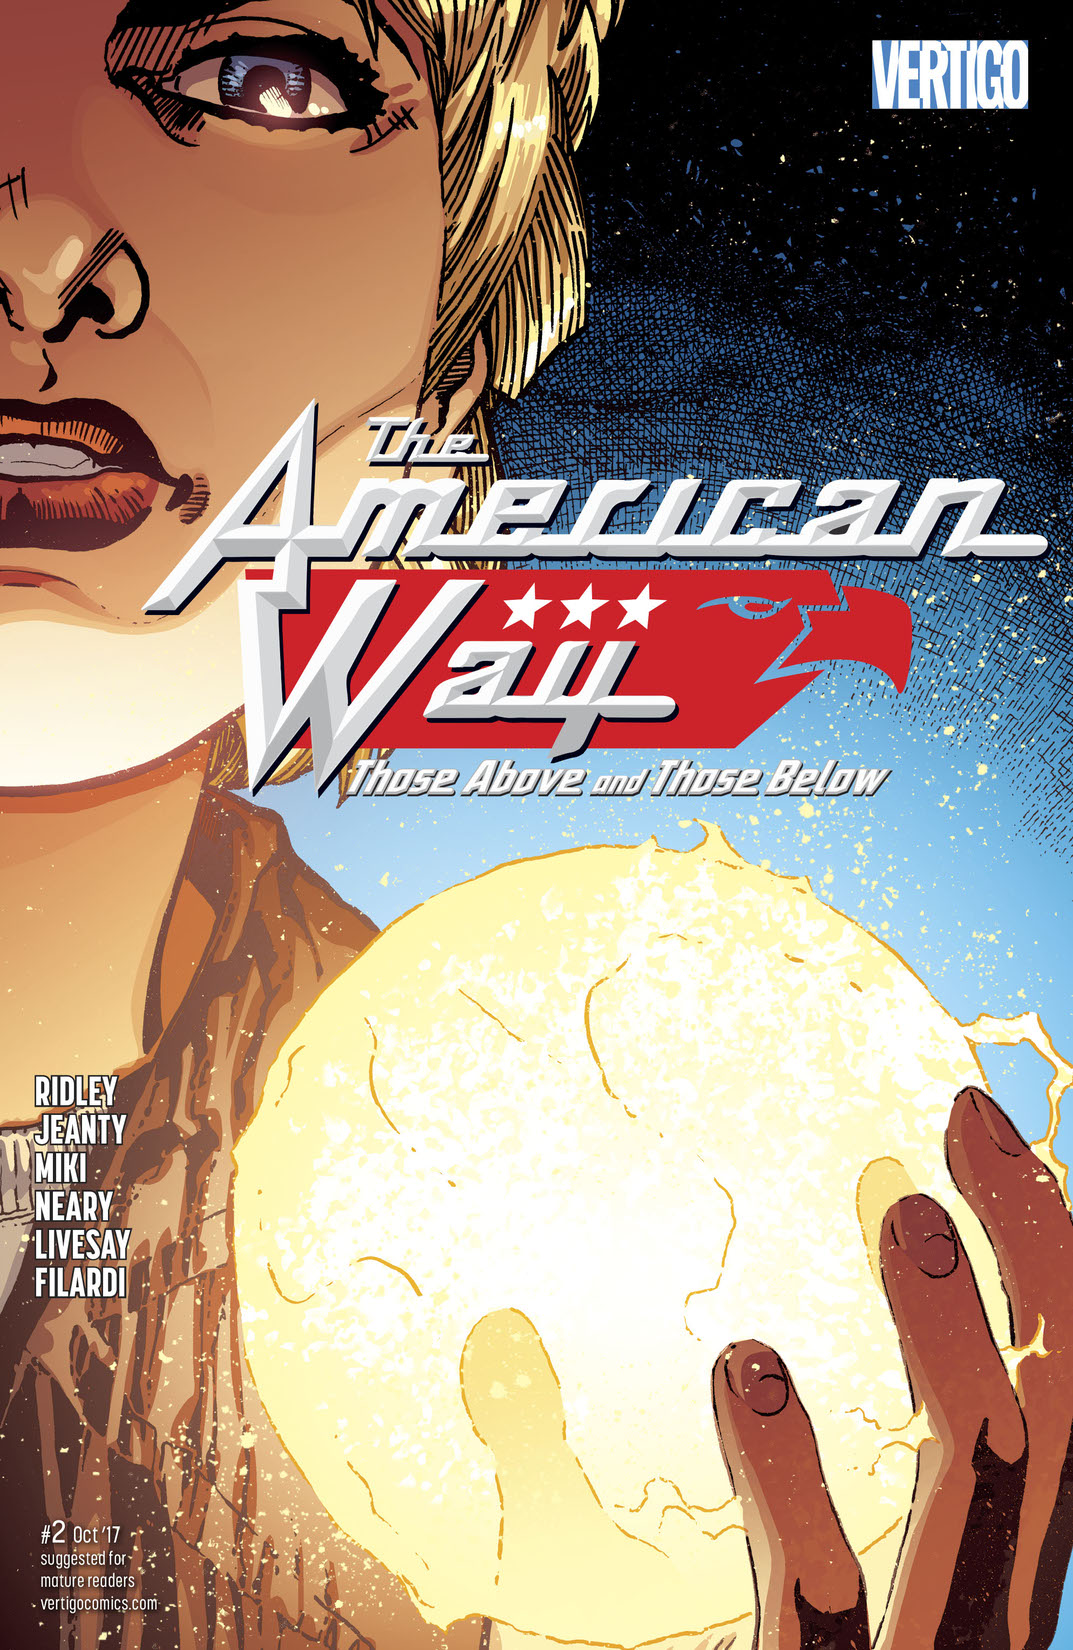 The American Way: Those Above and Those Below #2 preview images